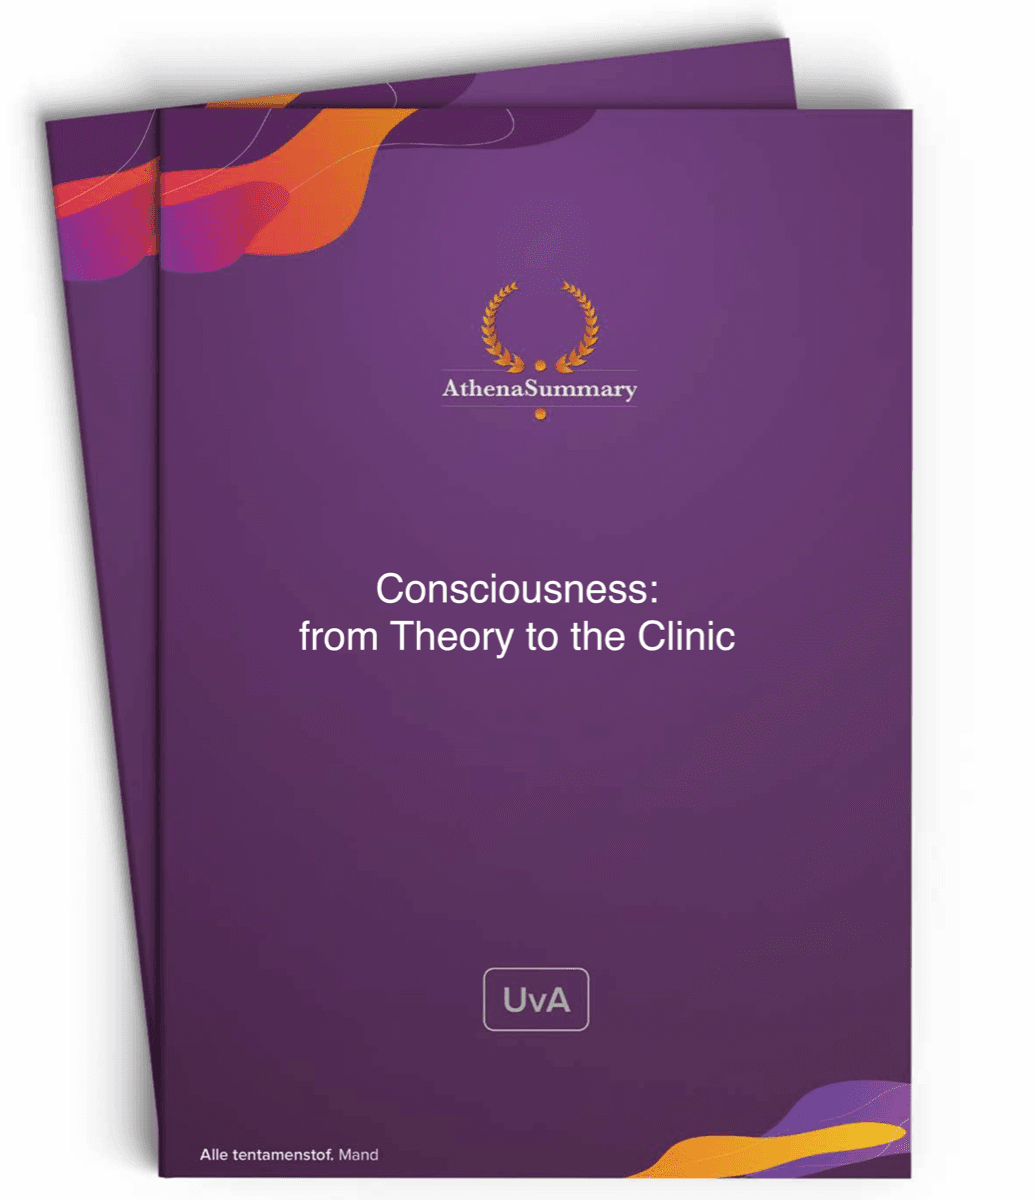 Literature Summary: Consciousness: from Theory to the Clinic